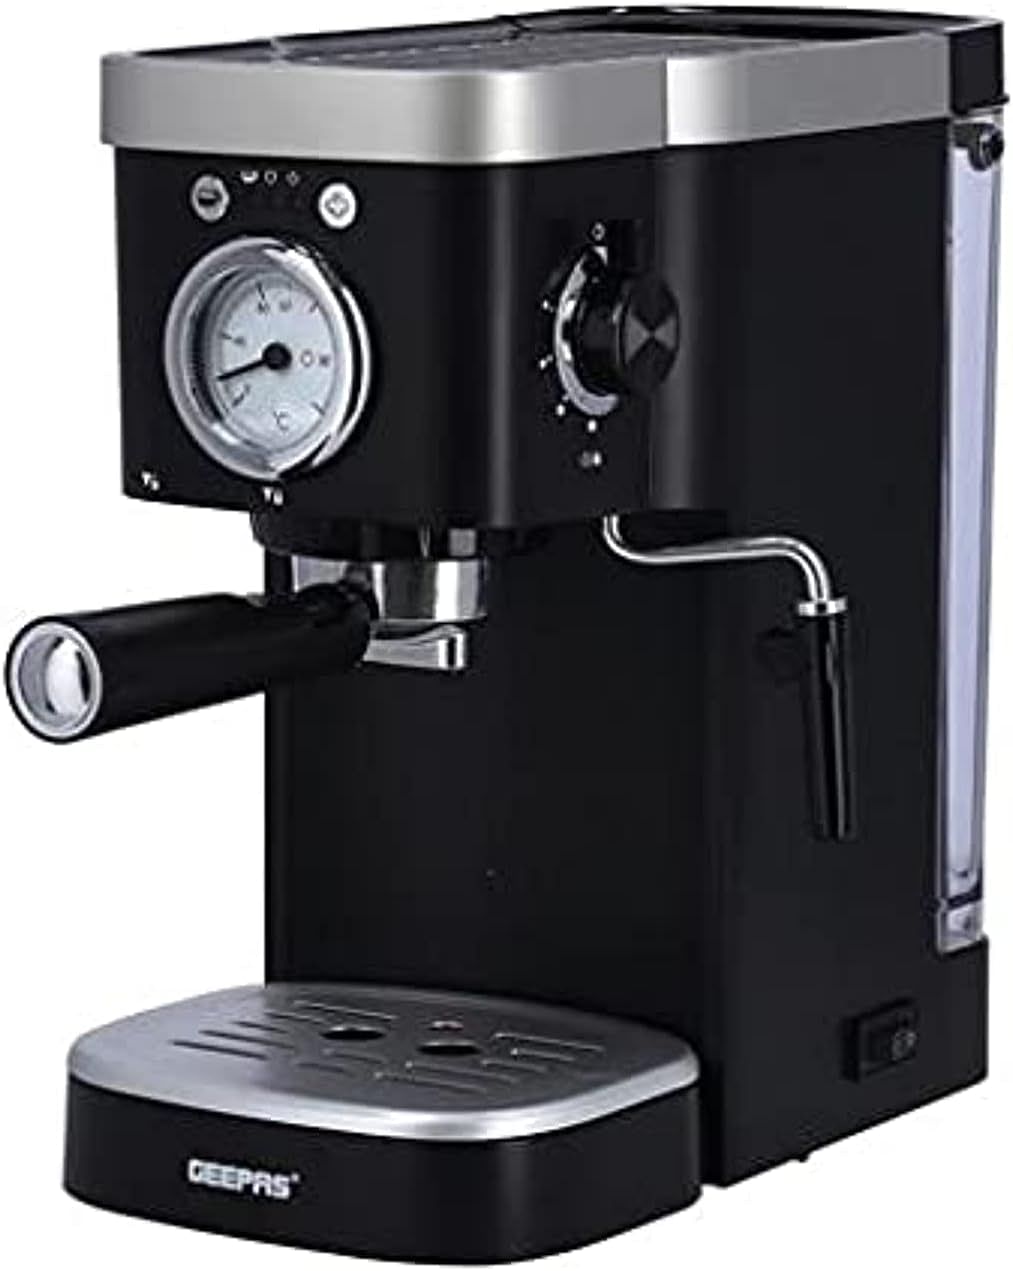 Geepas 1.2L 3 In 1 Coffee Machine - 1100W Coffee Maker For Instant Coffee, Espresso, Macchiato & More | Boil-Dry Protection, Anti-Drip Function, Automatic Turn-Off